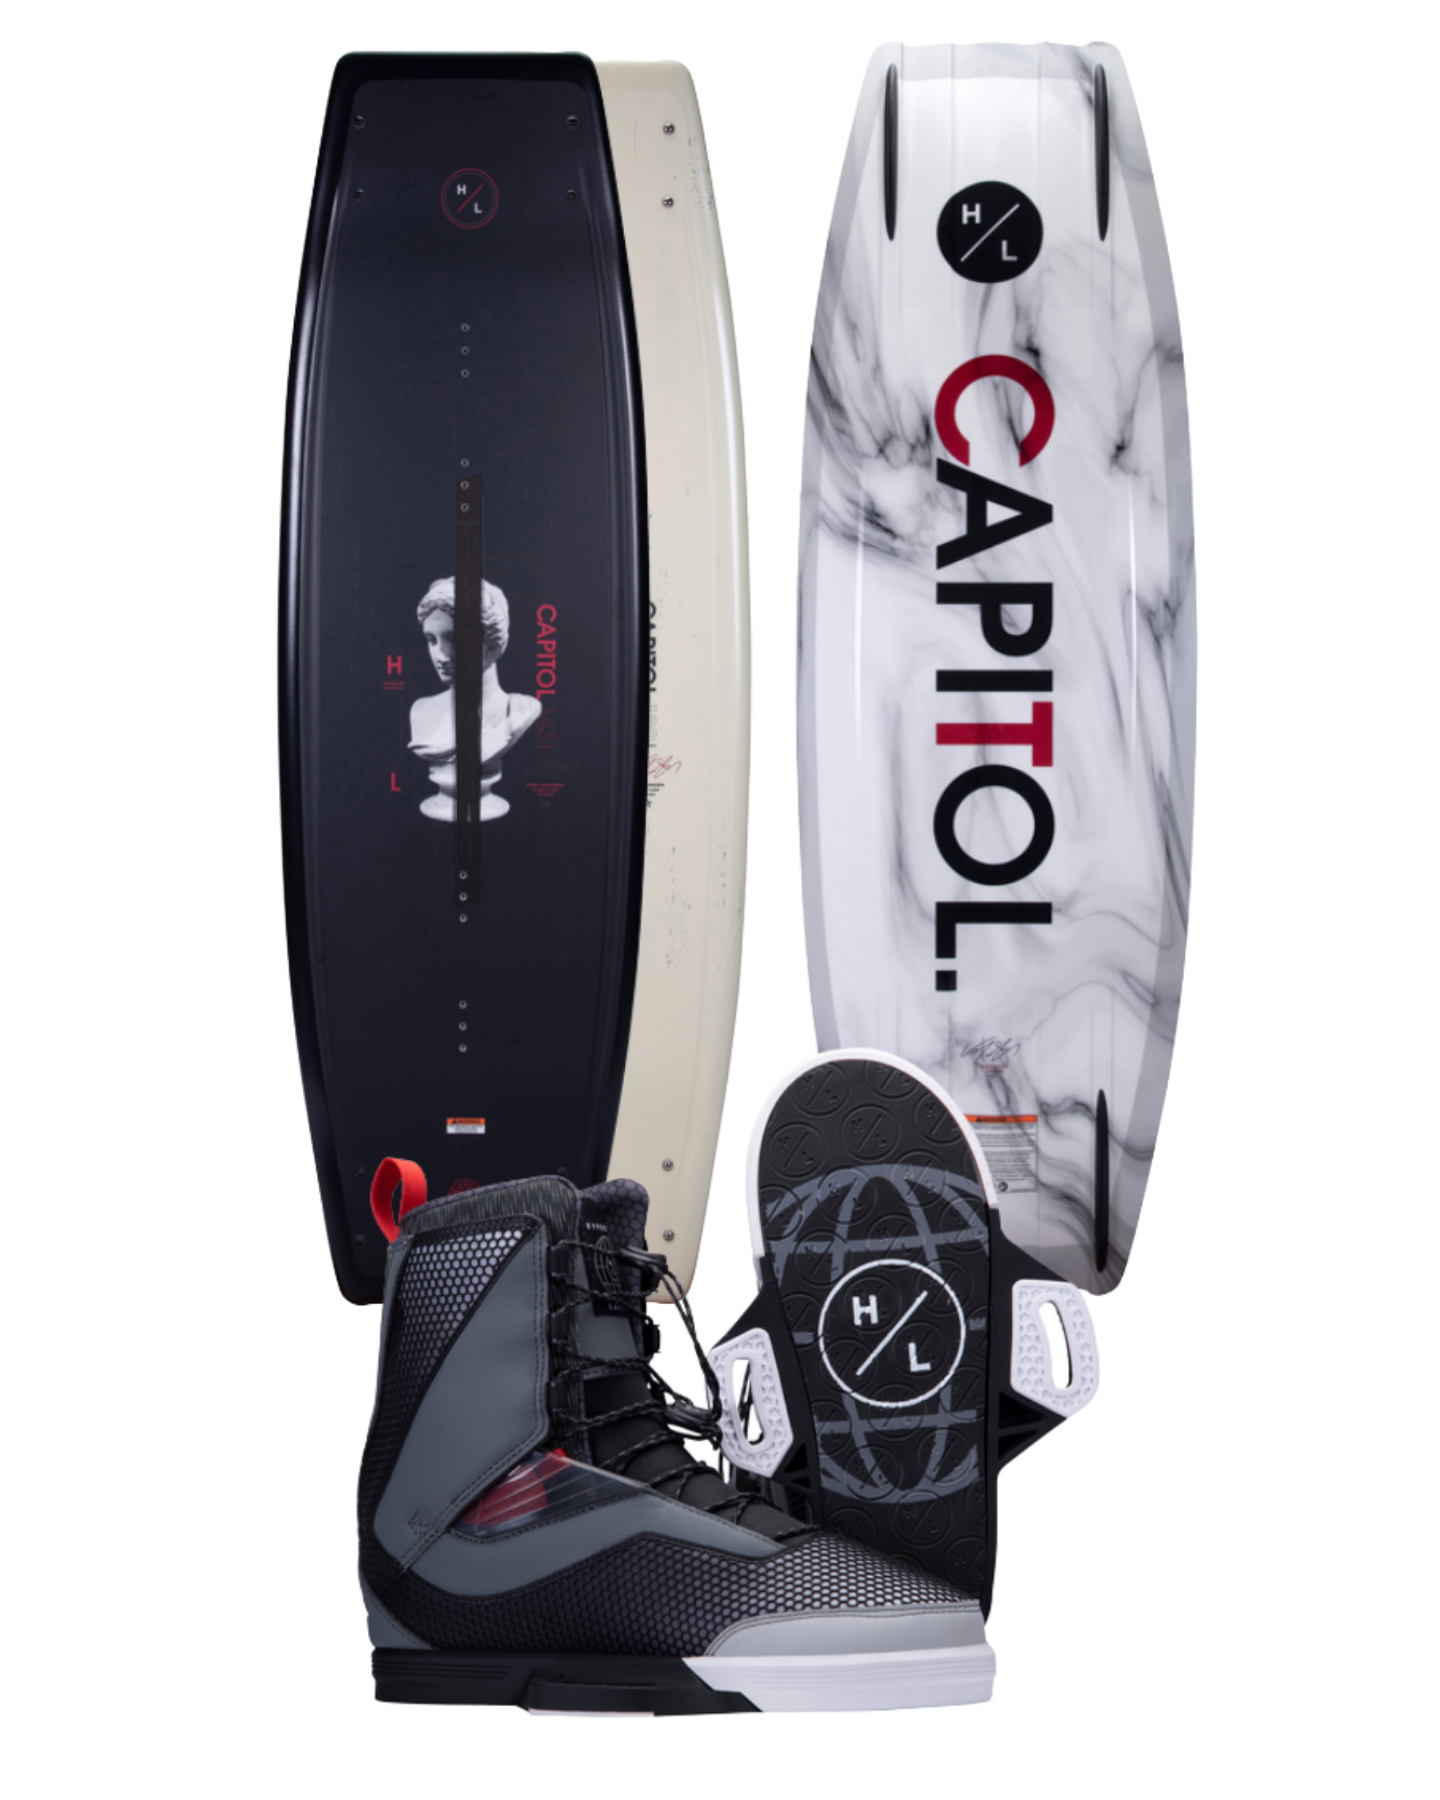 Hyperlite Capitol Wakeboard with Capitol Boots Wakeboard Packages - Mens - Trojan Wake Ski Snow